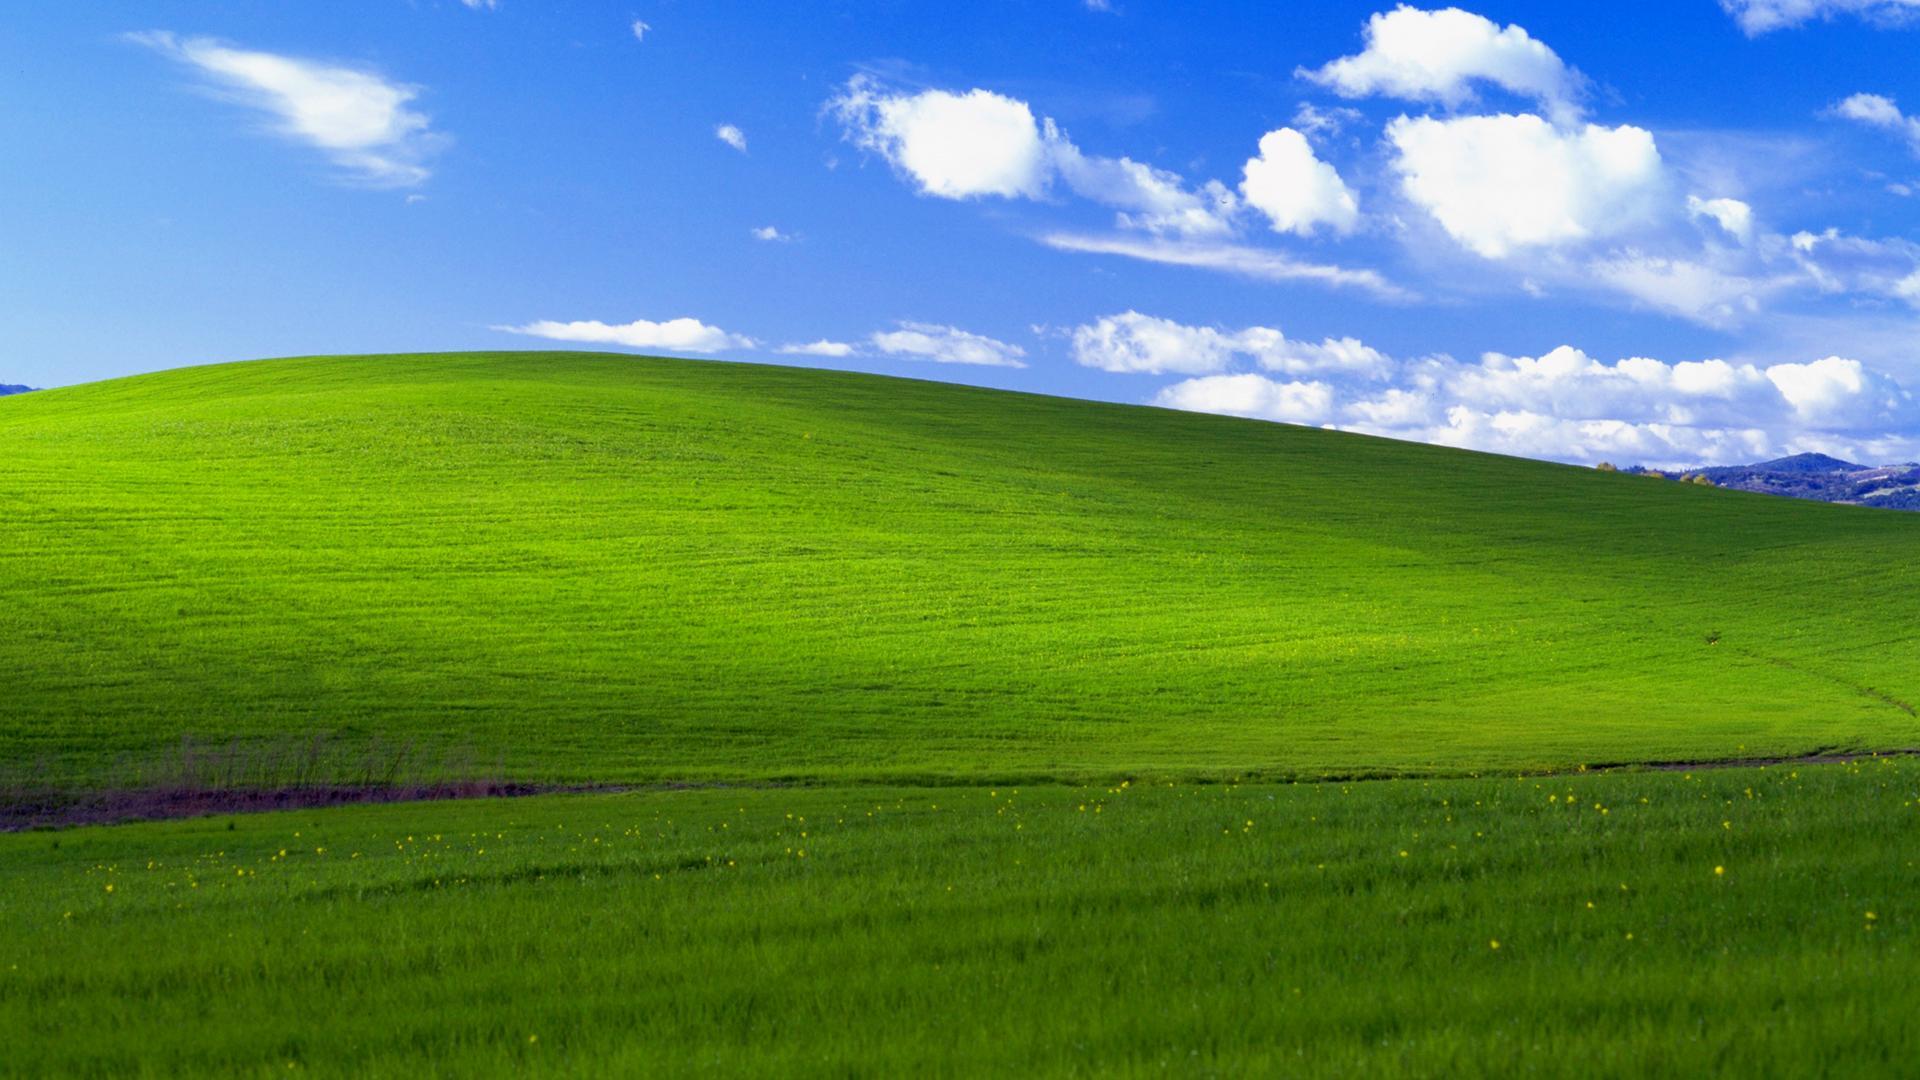 Popular hill in Windows XP wallpaper 'Bliss' may have survived